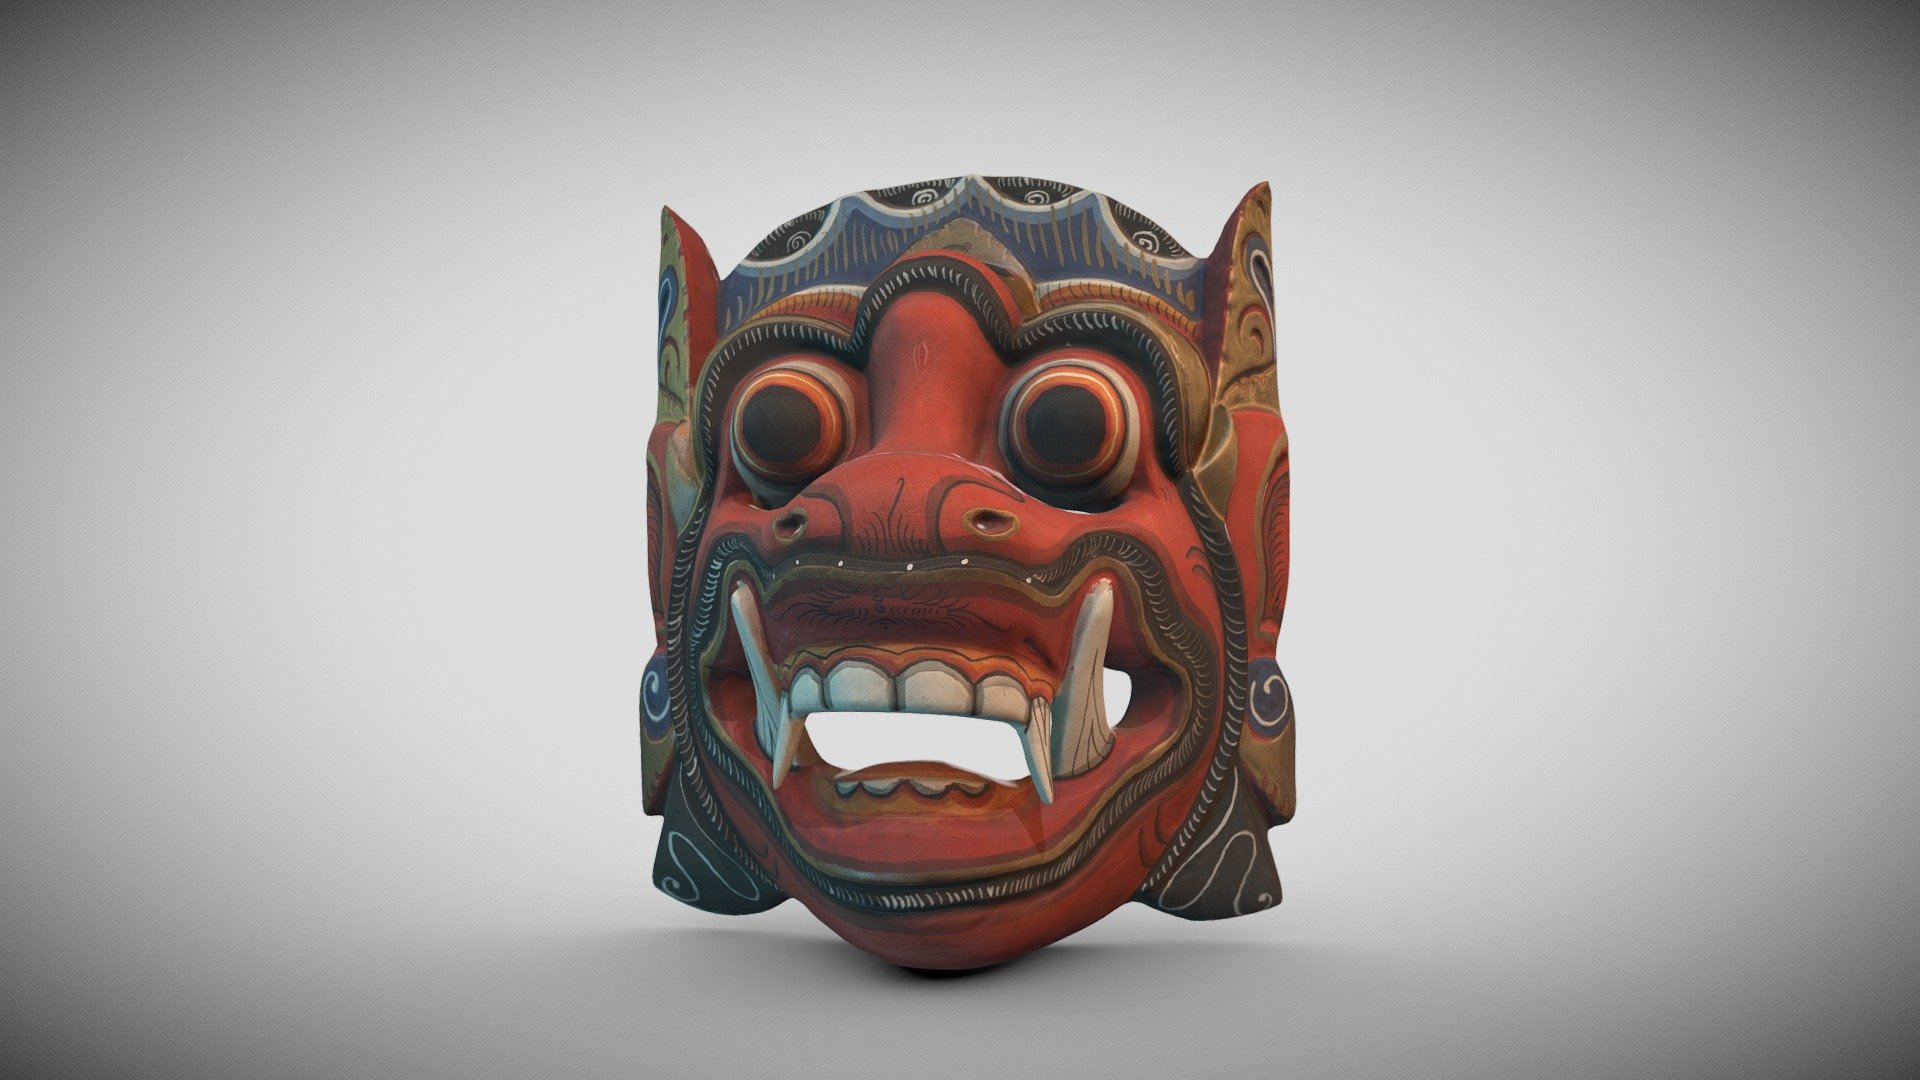 Upon request, we scanned this Voodoo Mask 3d model